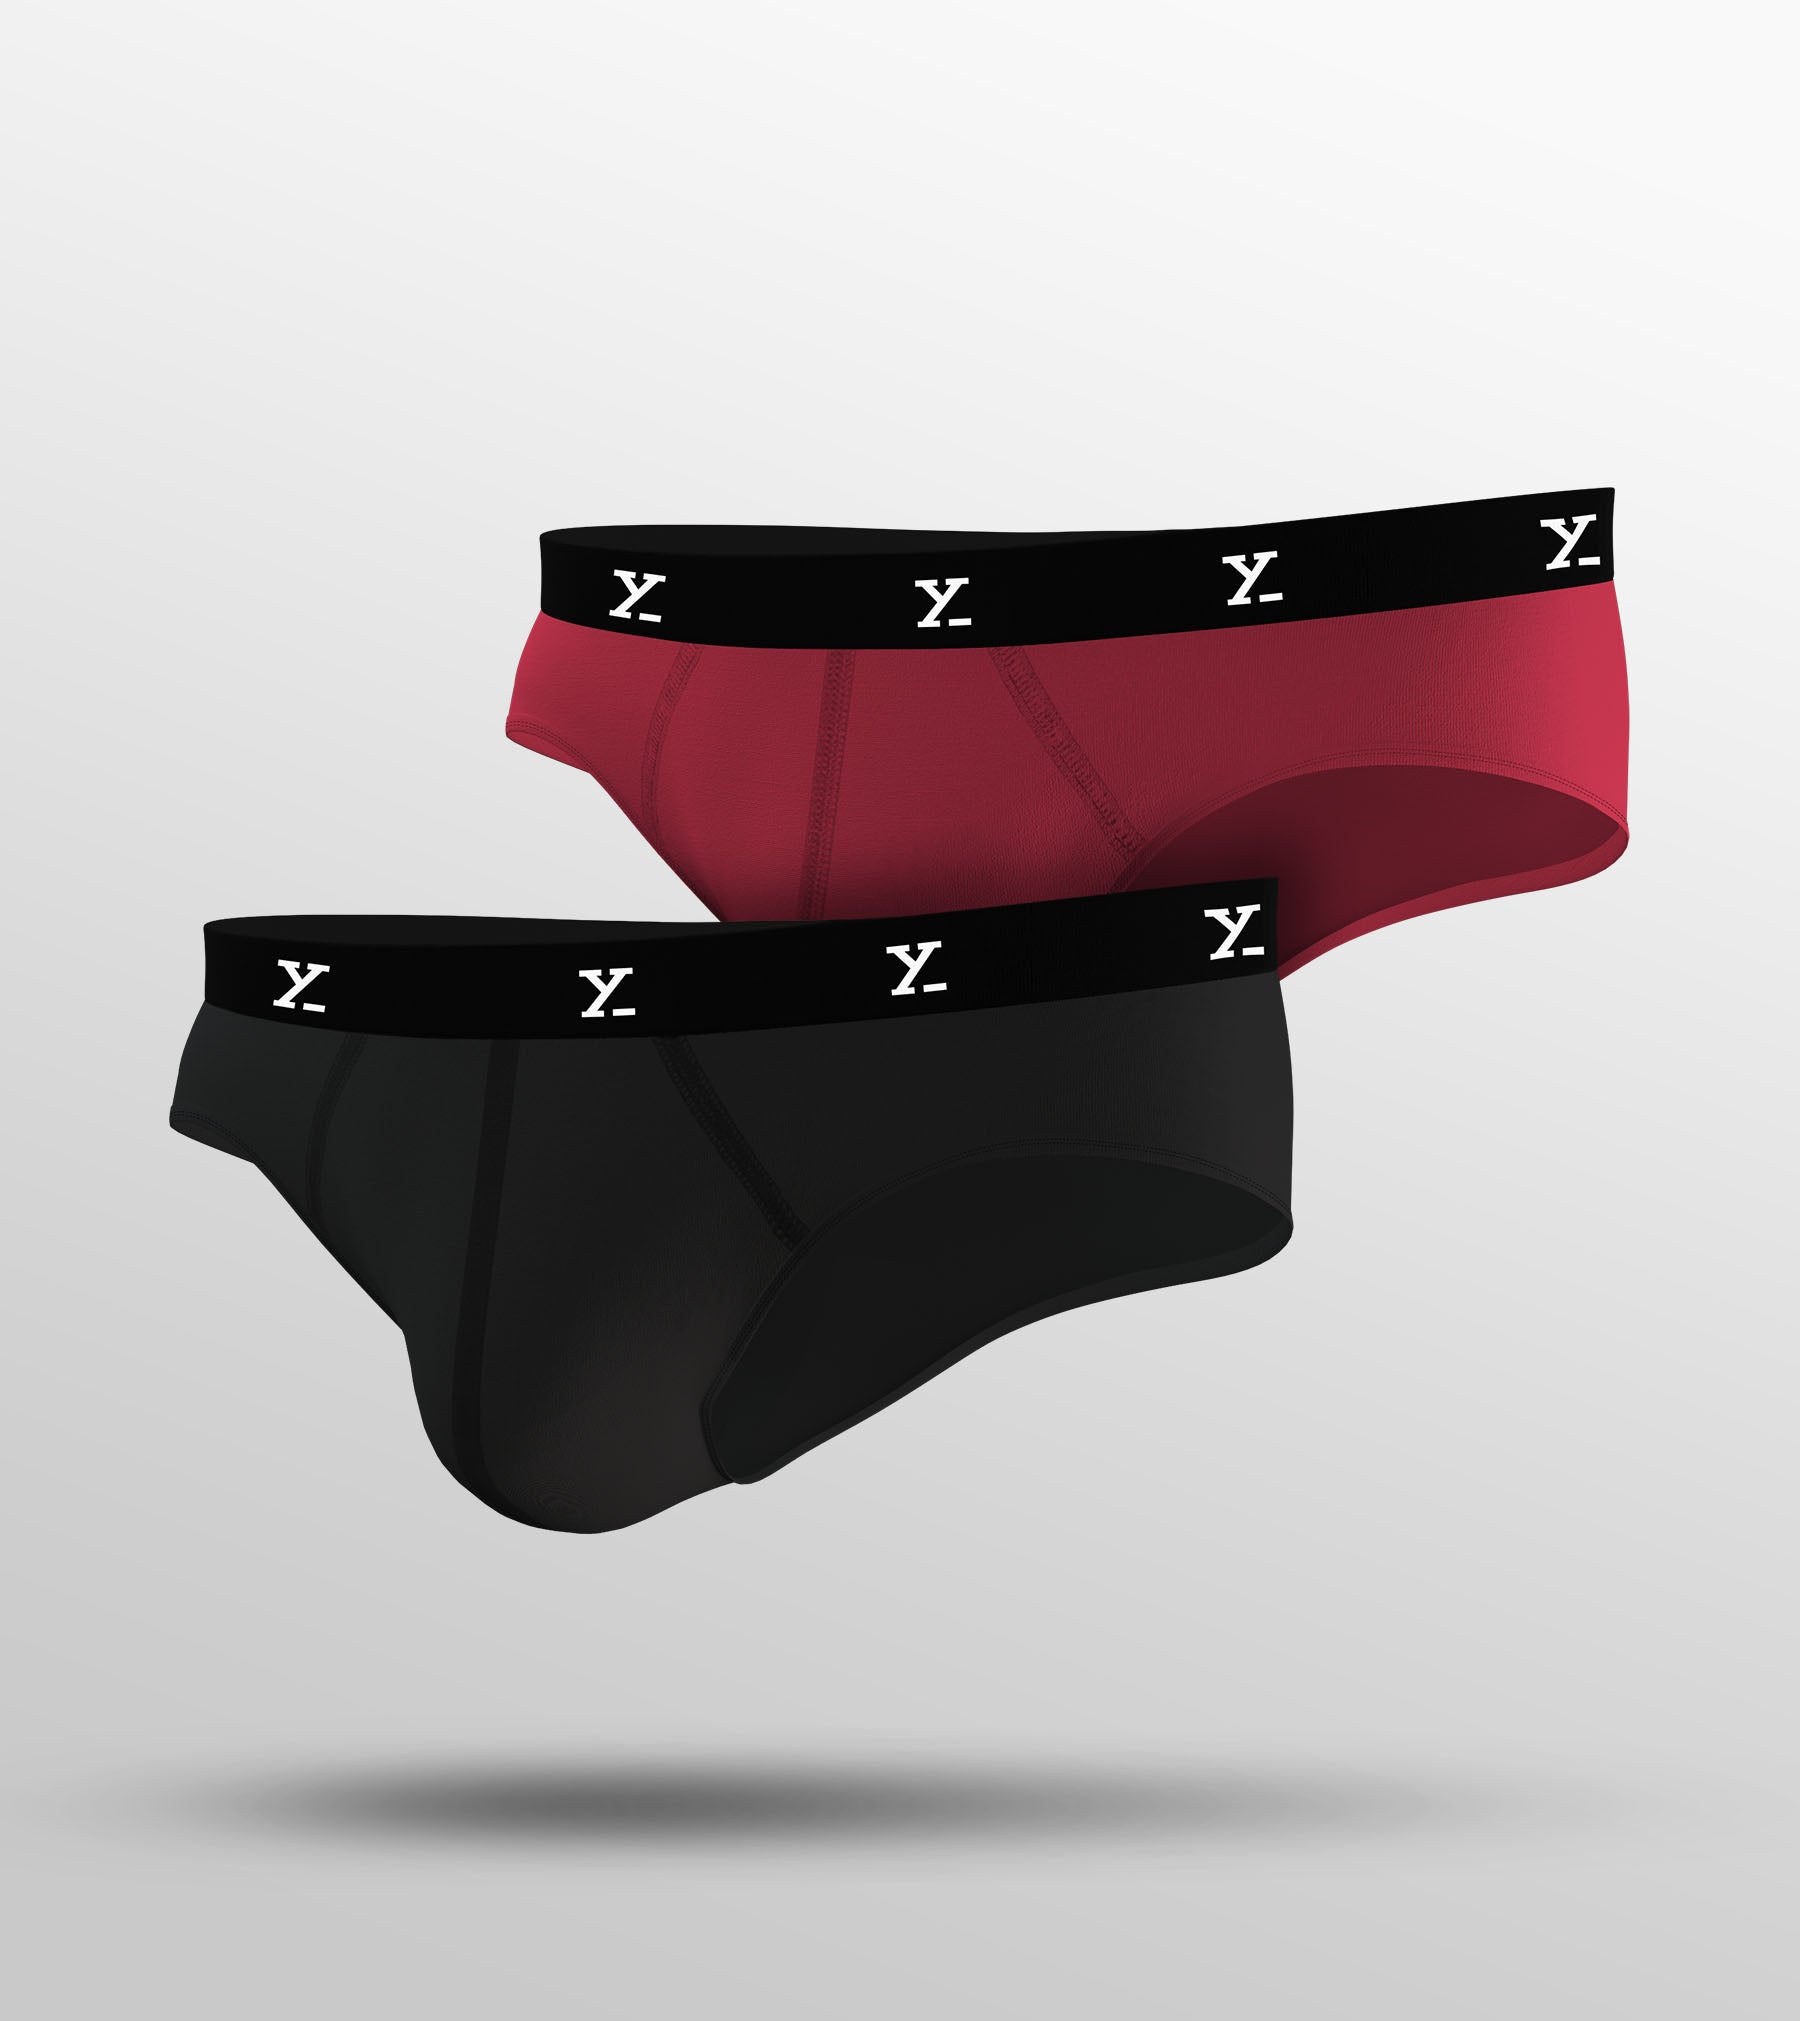 Ace Modal Briefs For Men Pack of 2 (Red, Black) -  XYXX Mens Apparels